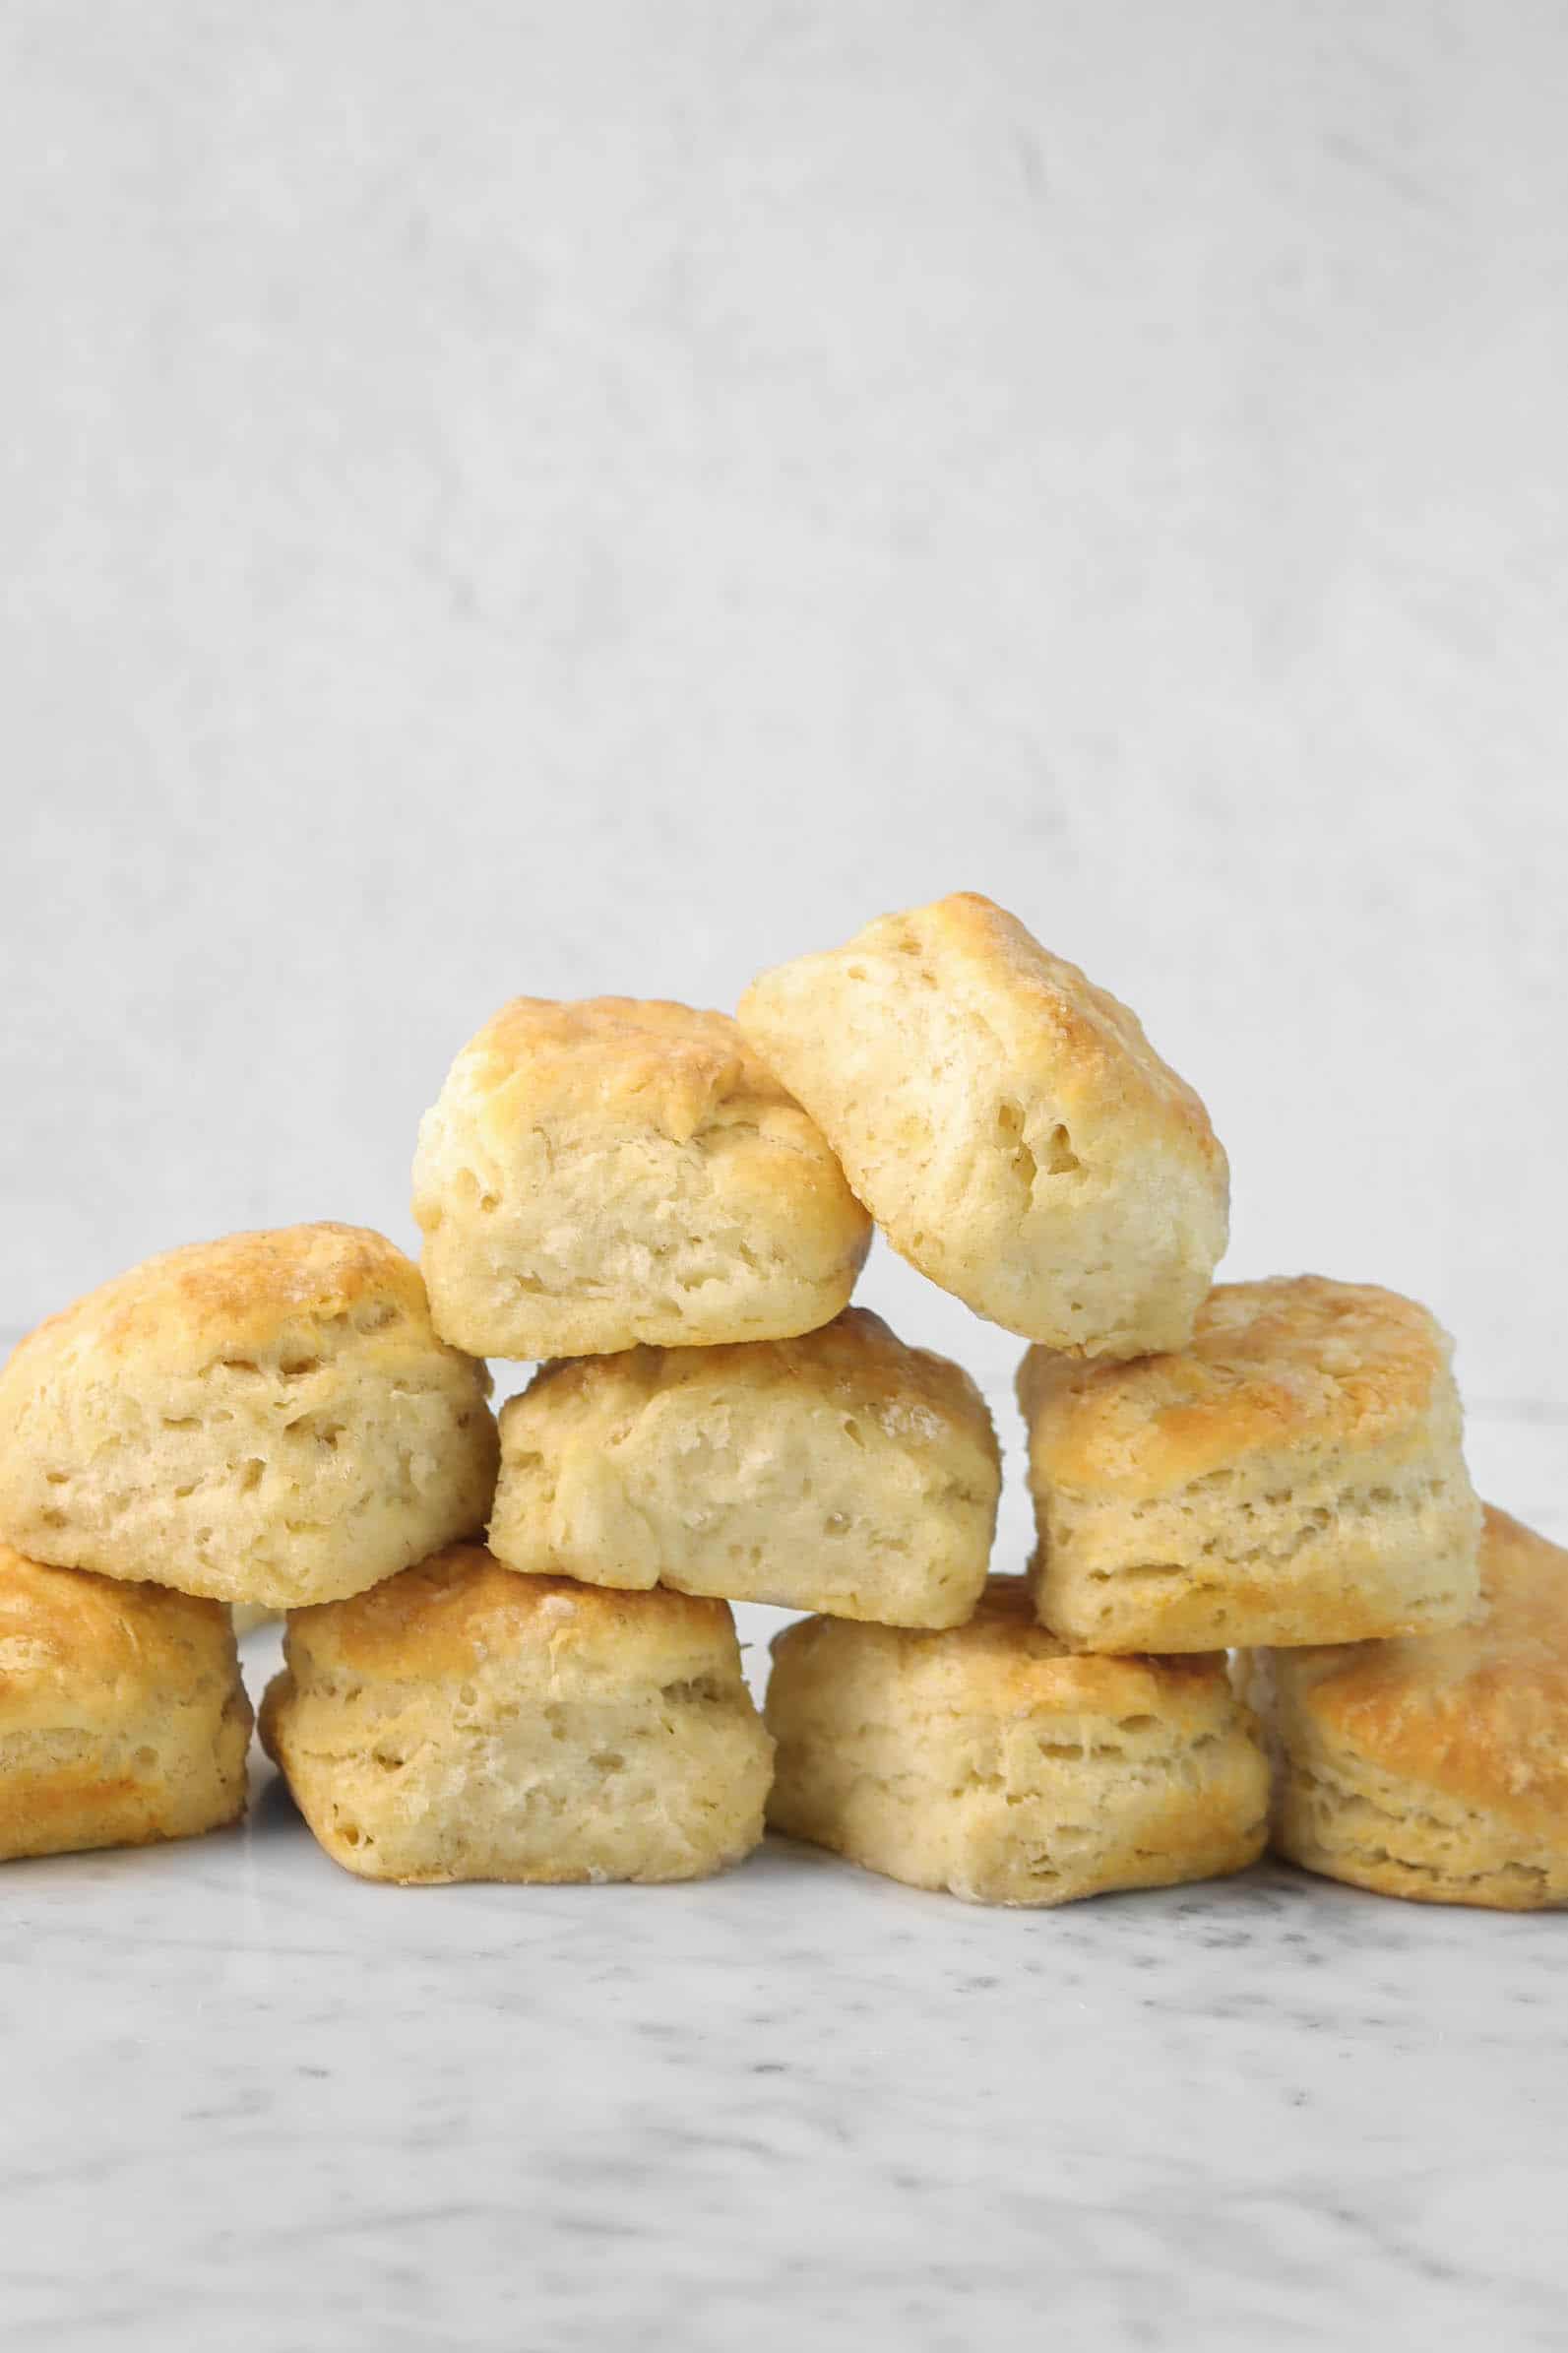 sourdough biscuits stacked on top of each other